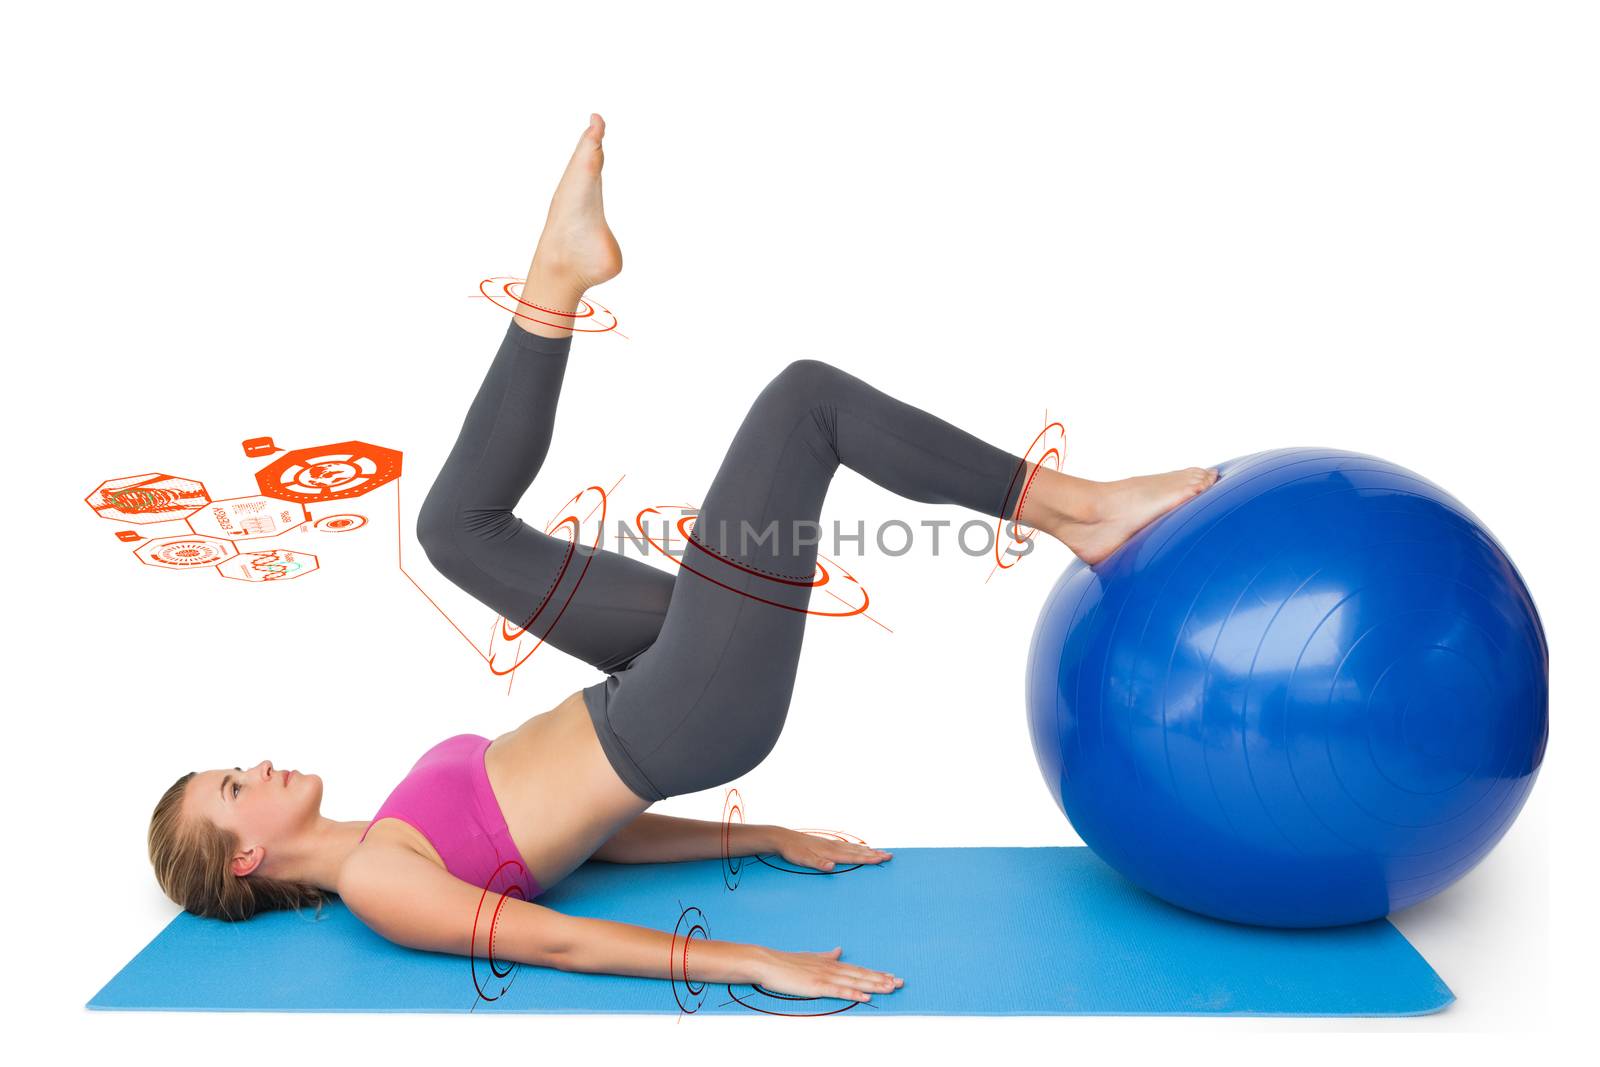 Composite image of side view of a fit woman exercising with fitness ball by Wavebreakmedia